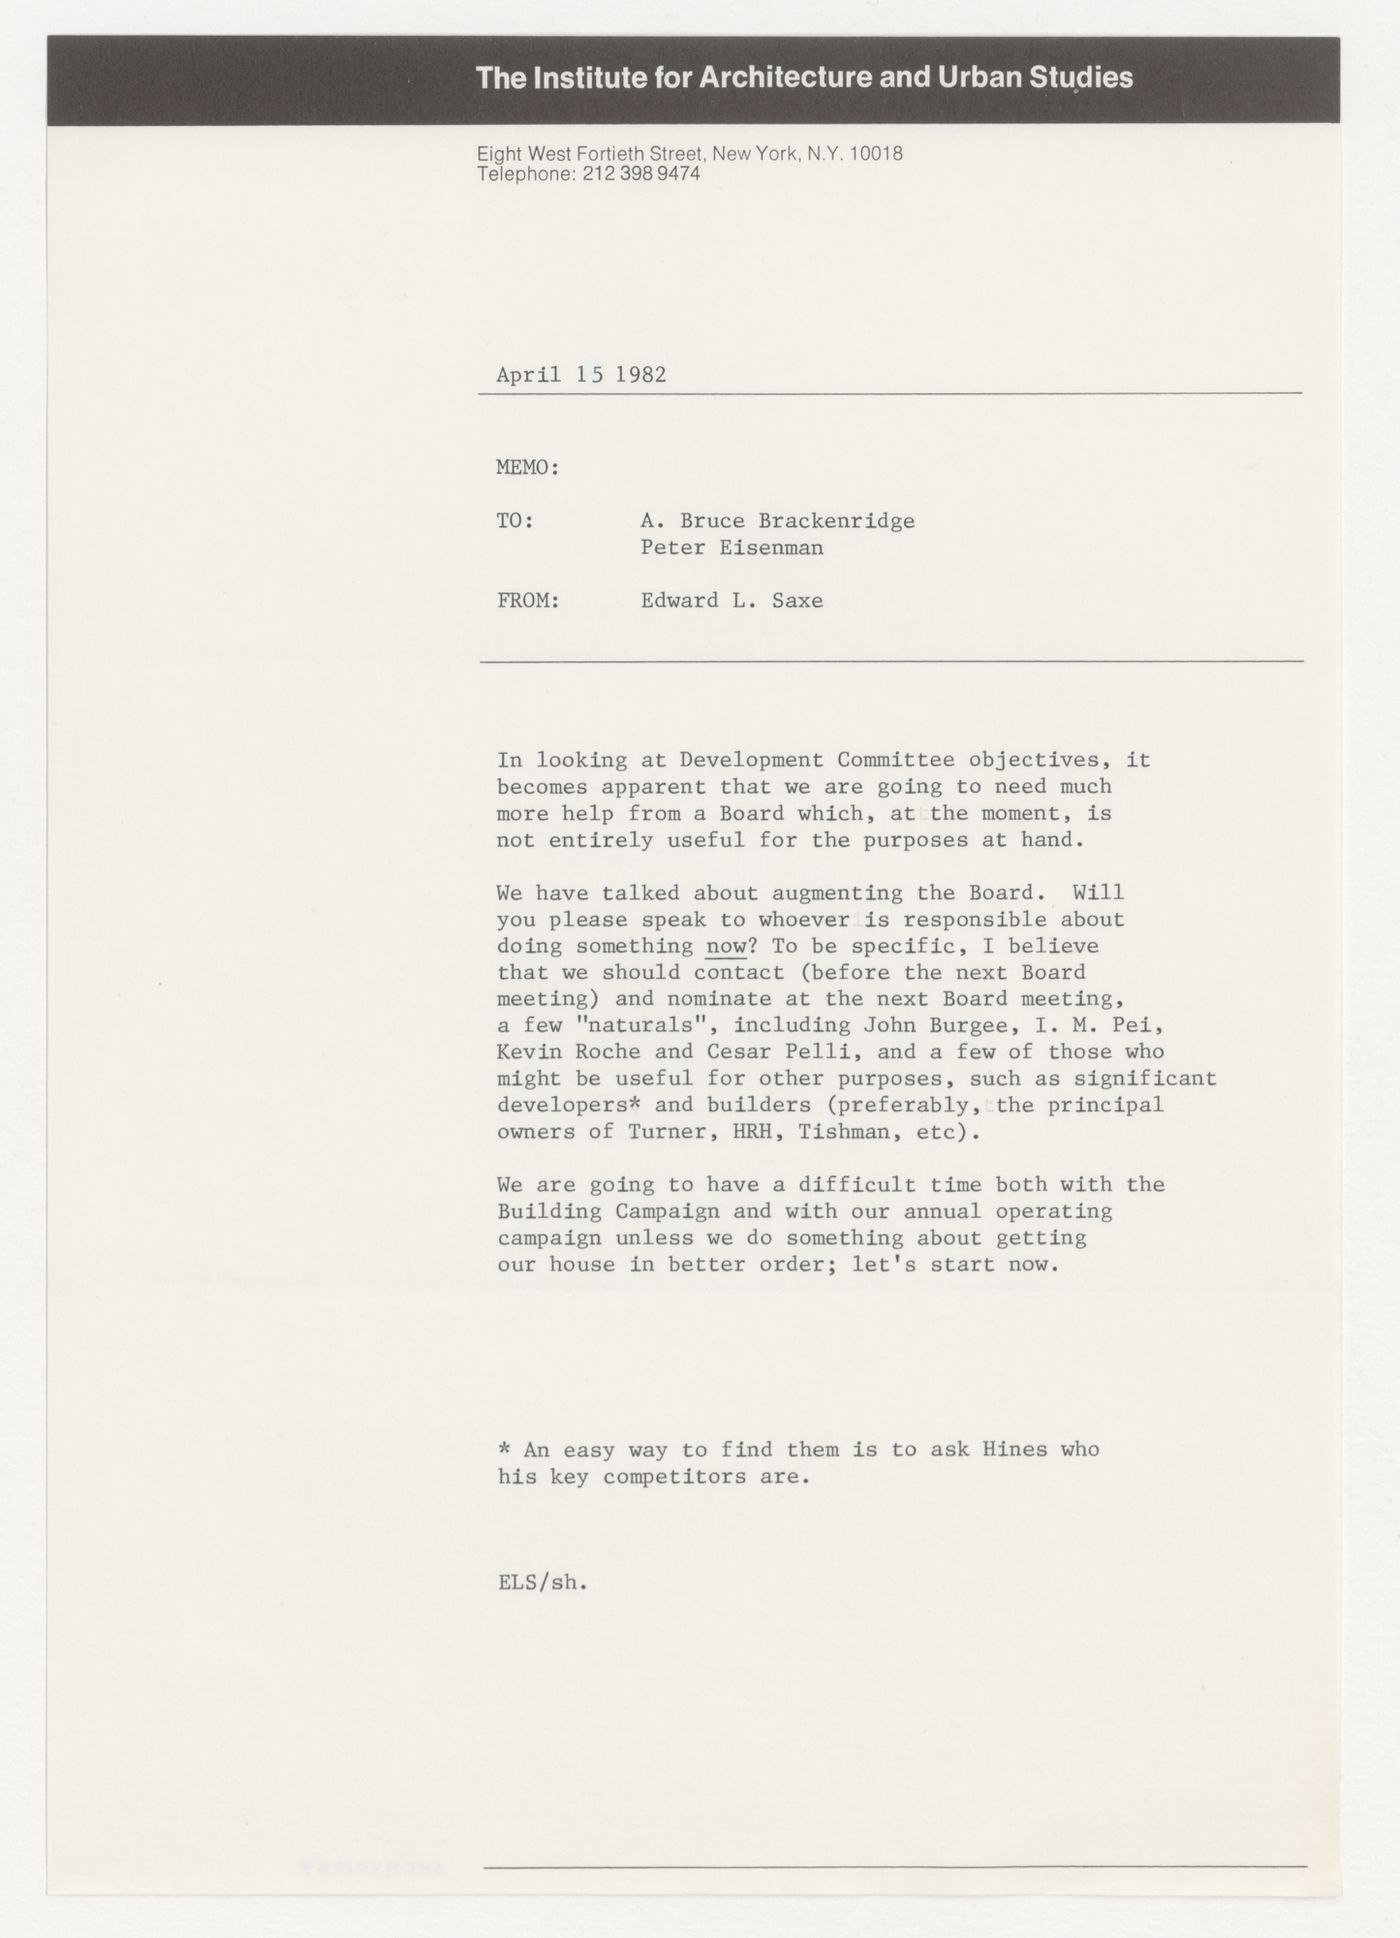 Memorandum from Edward L. Saxe to Peter D. Eisenman and Bruce Brackenridge about adding new members to the Board of Trustees